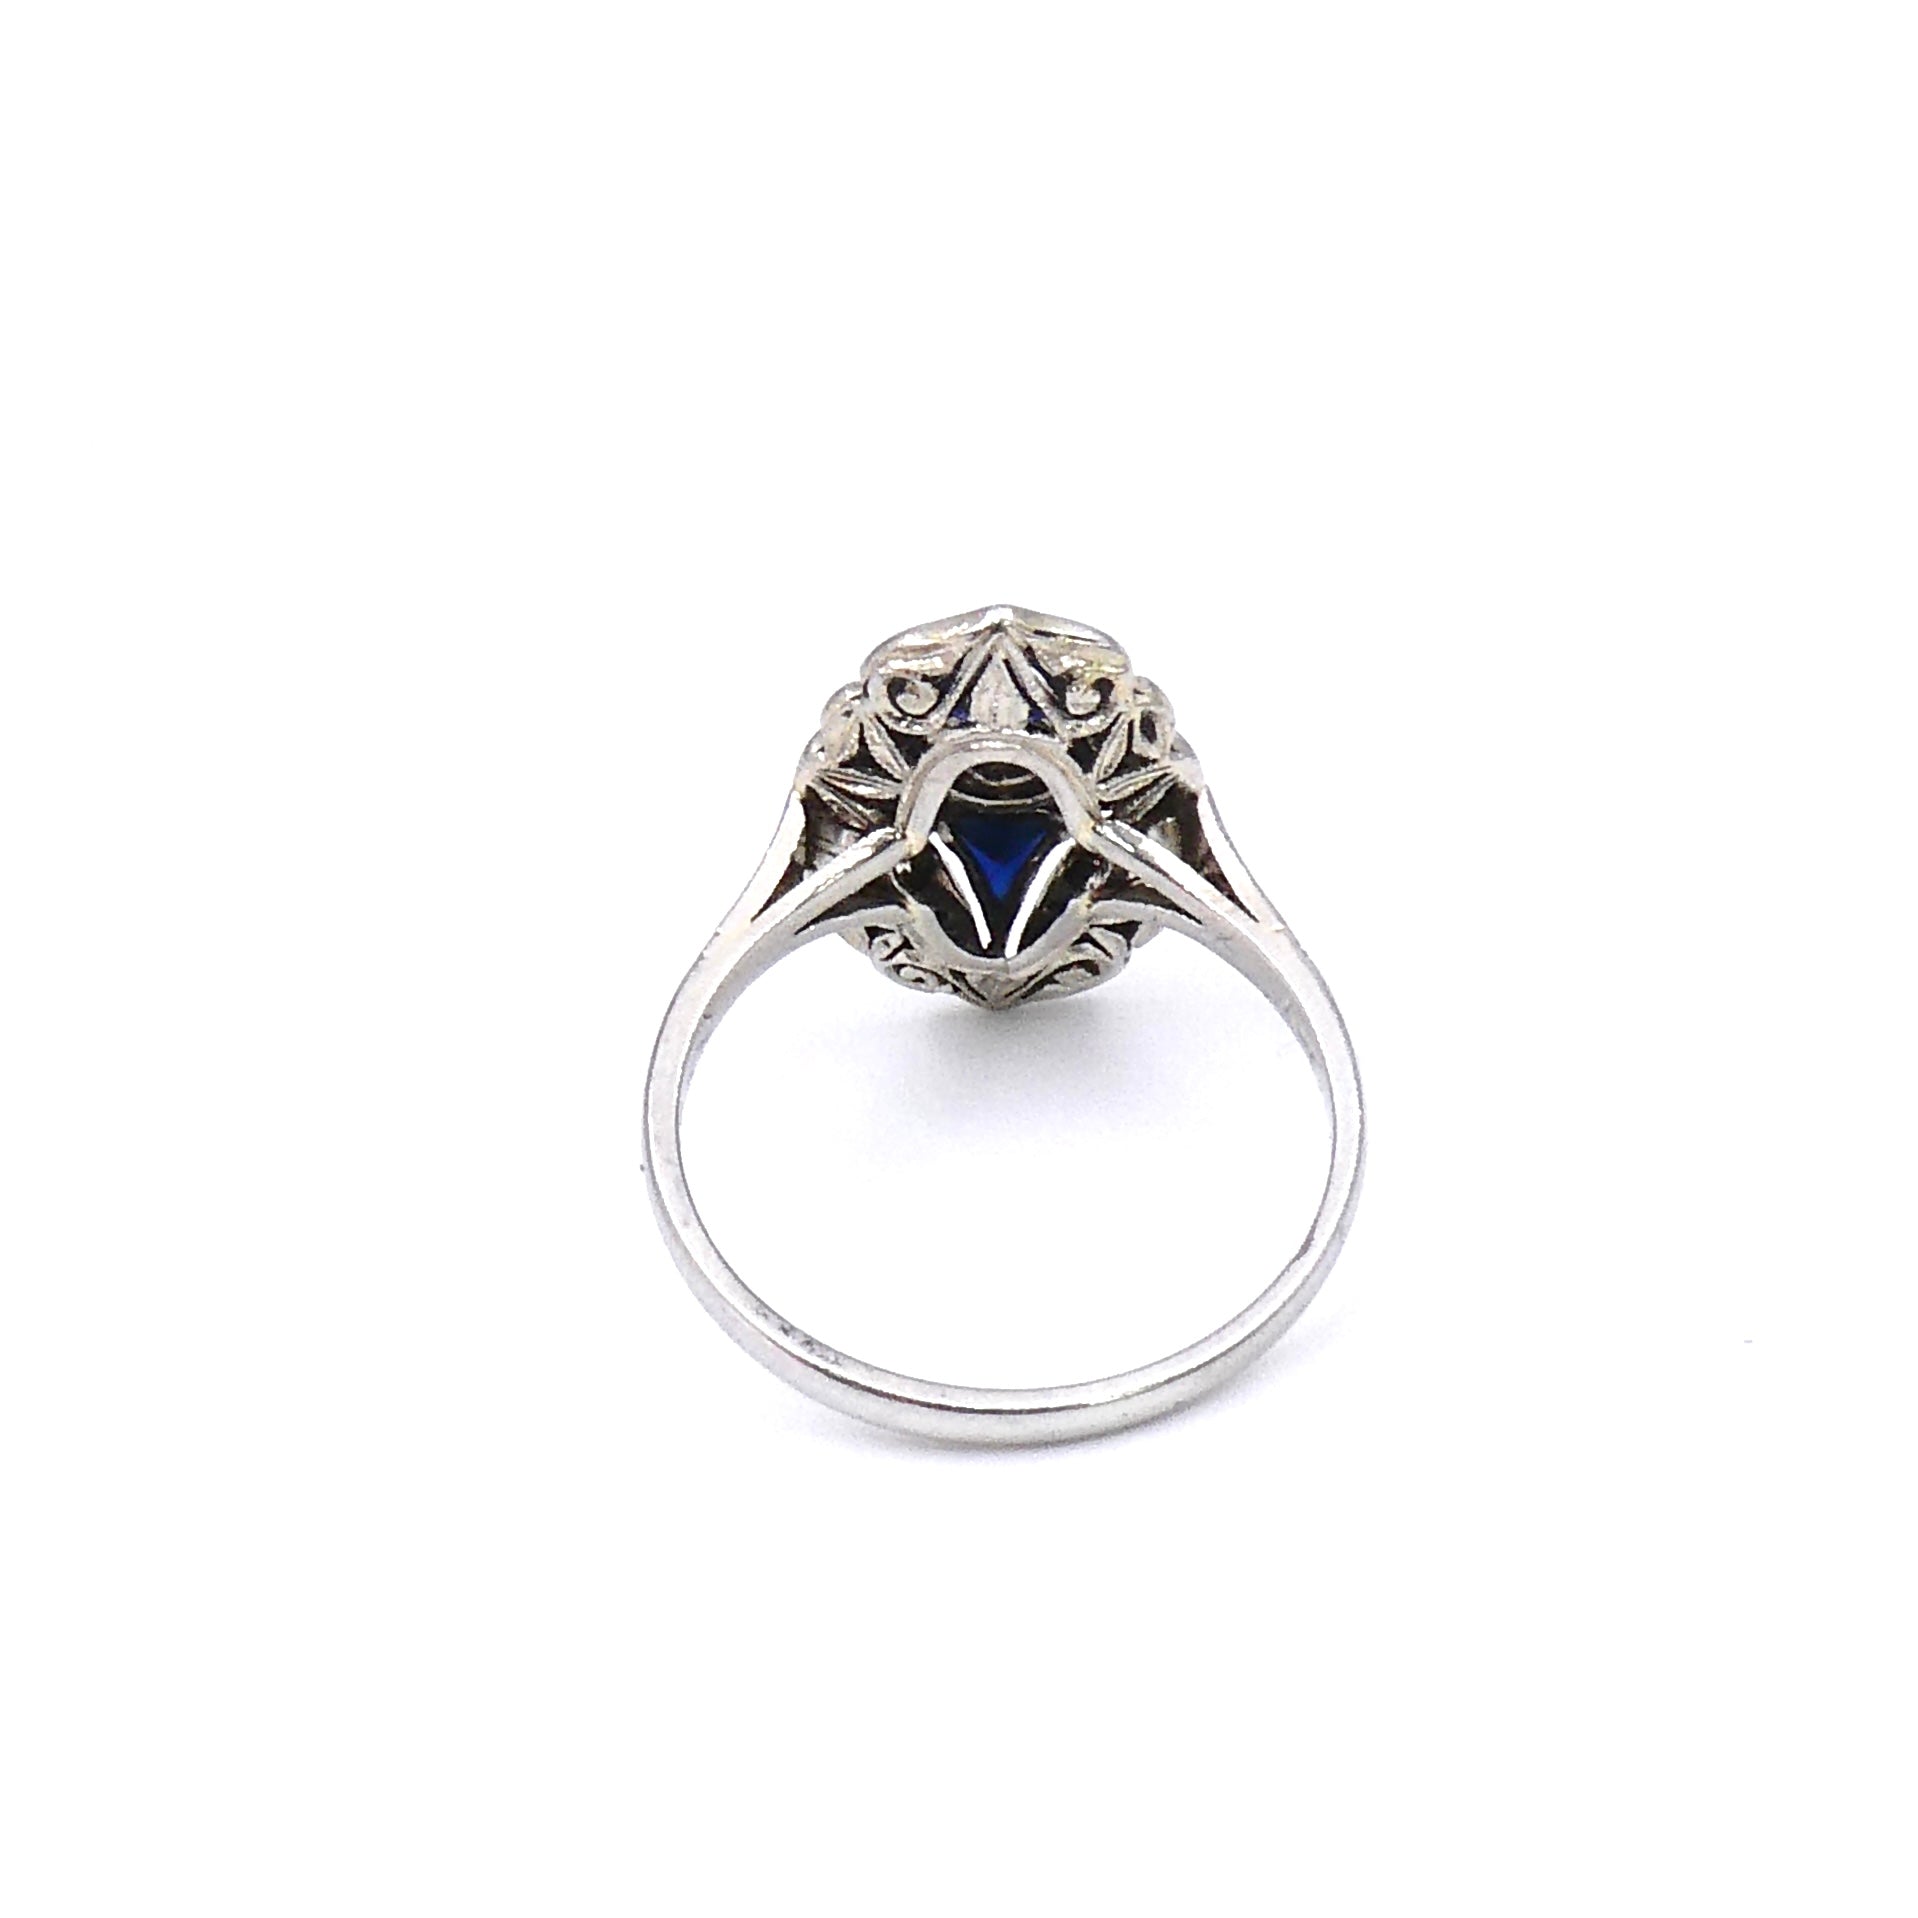 Vintage Sapphire ring with diamonds, an Art Deco style sapphire ring. - Collected